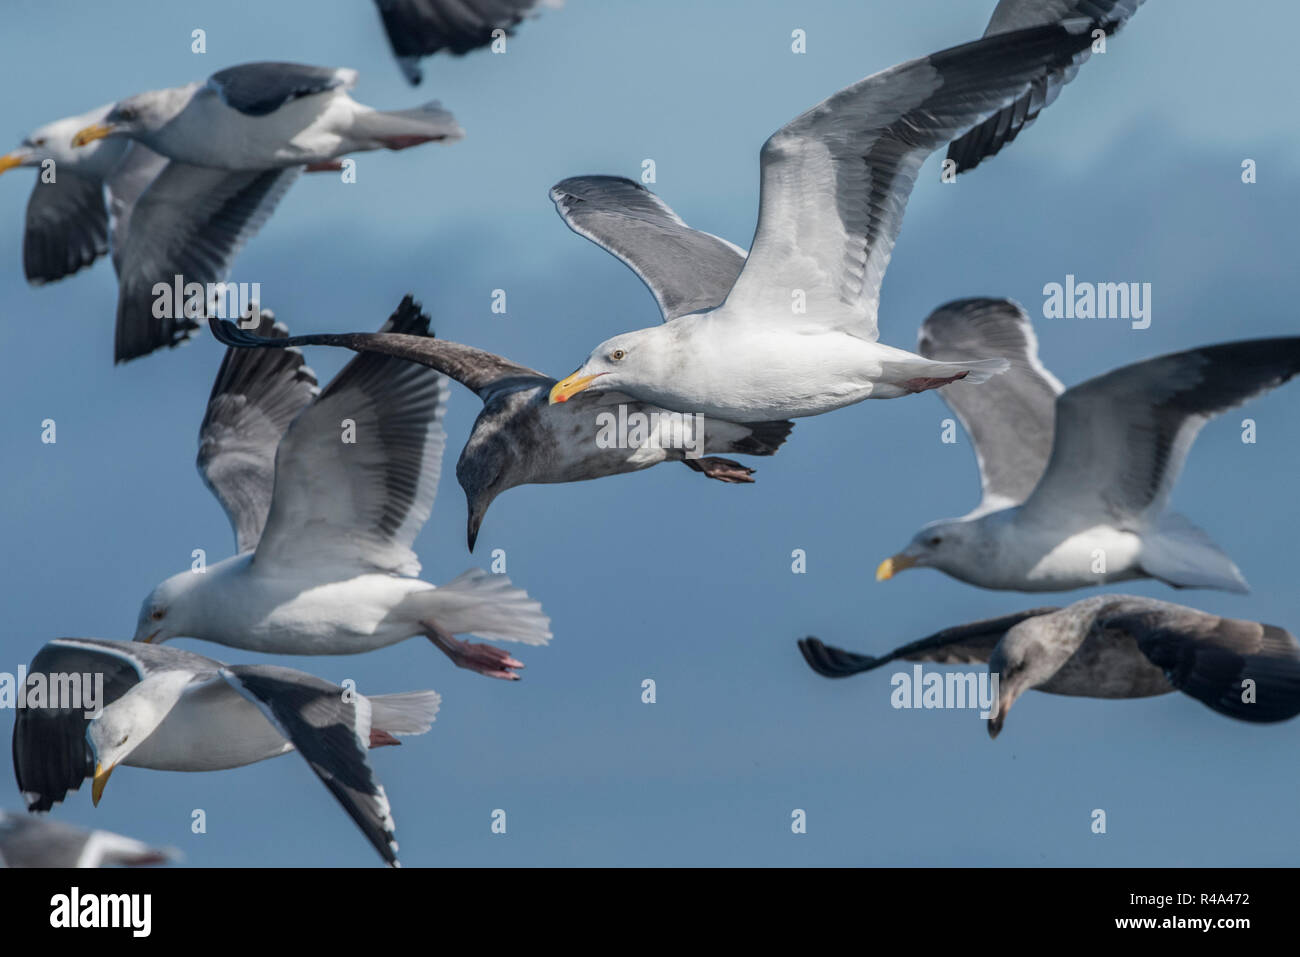 A flock of seagulls, specifically the western gull (Larus occidentalis) feeding out in open ocean off the coast of California. Stock Photo